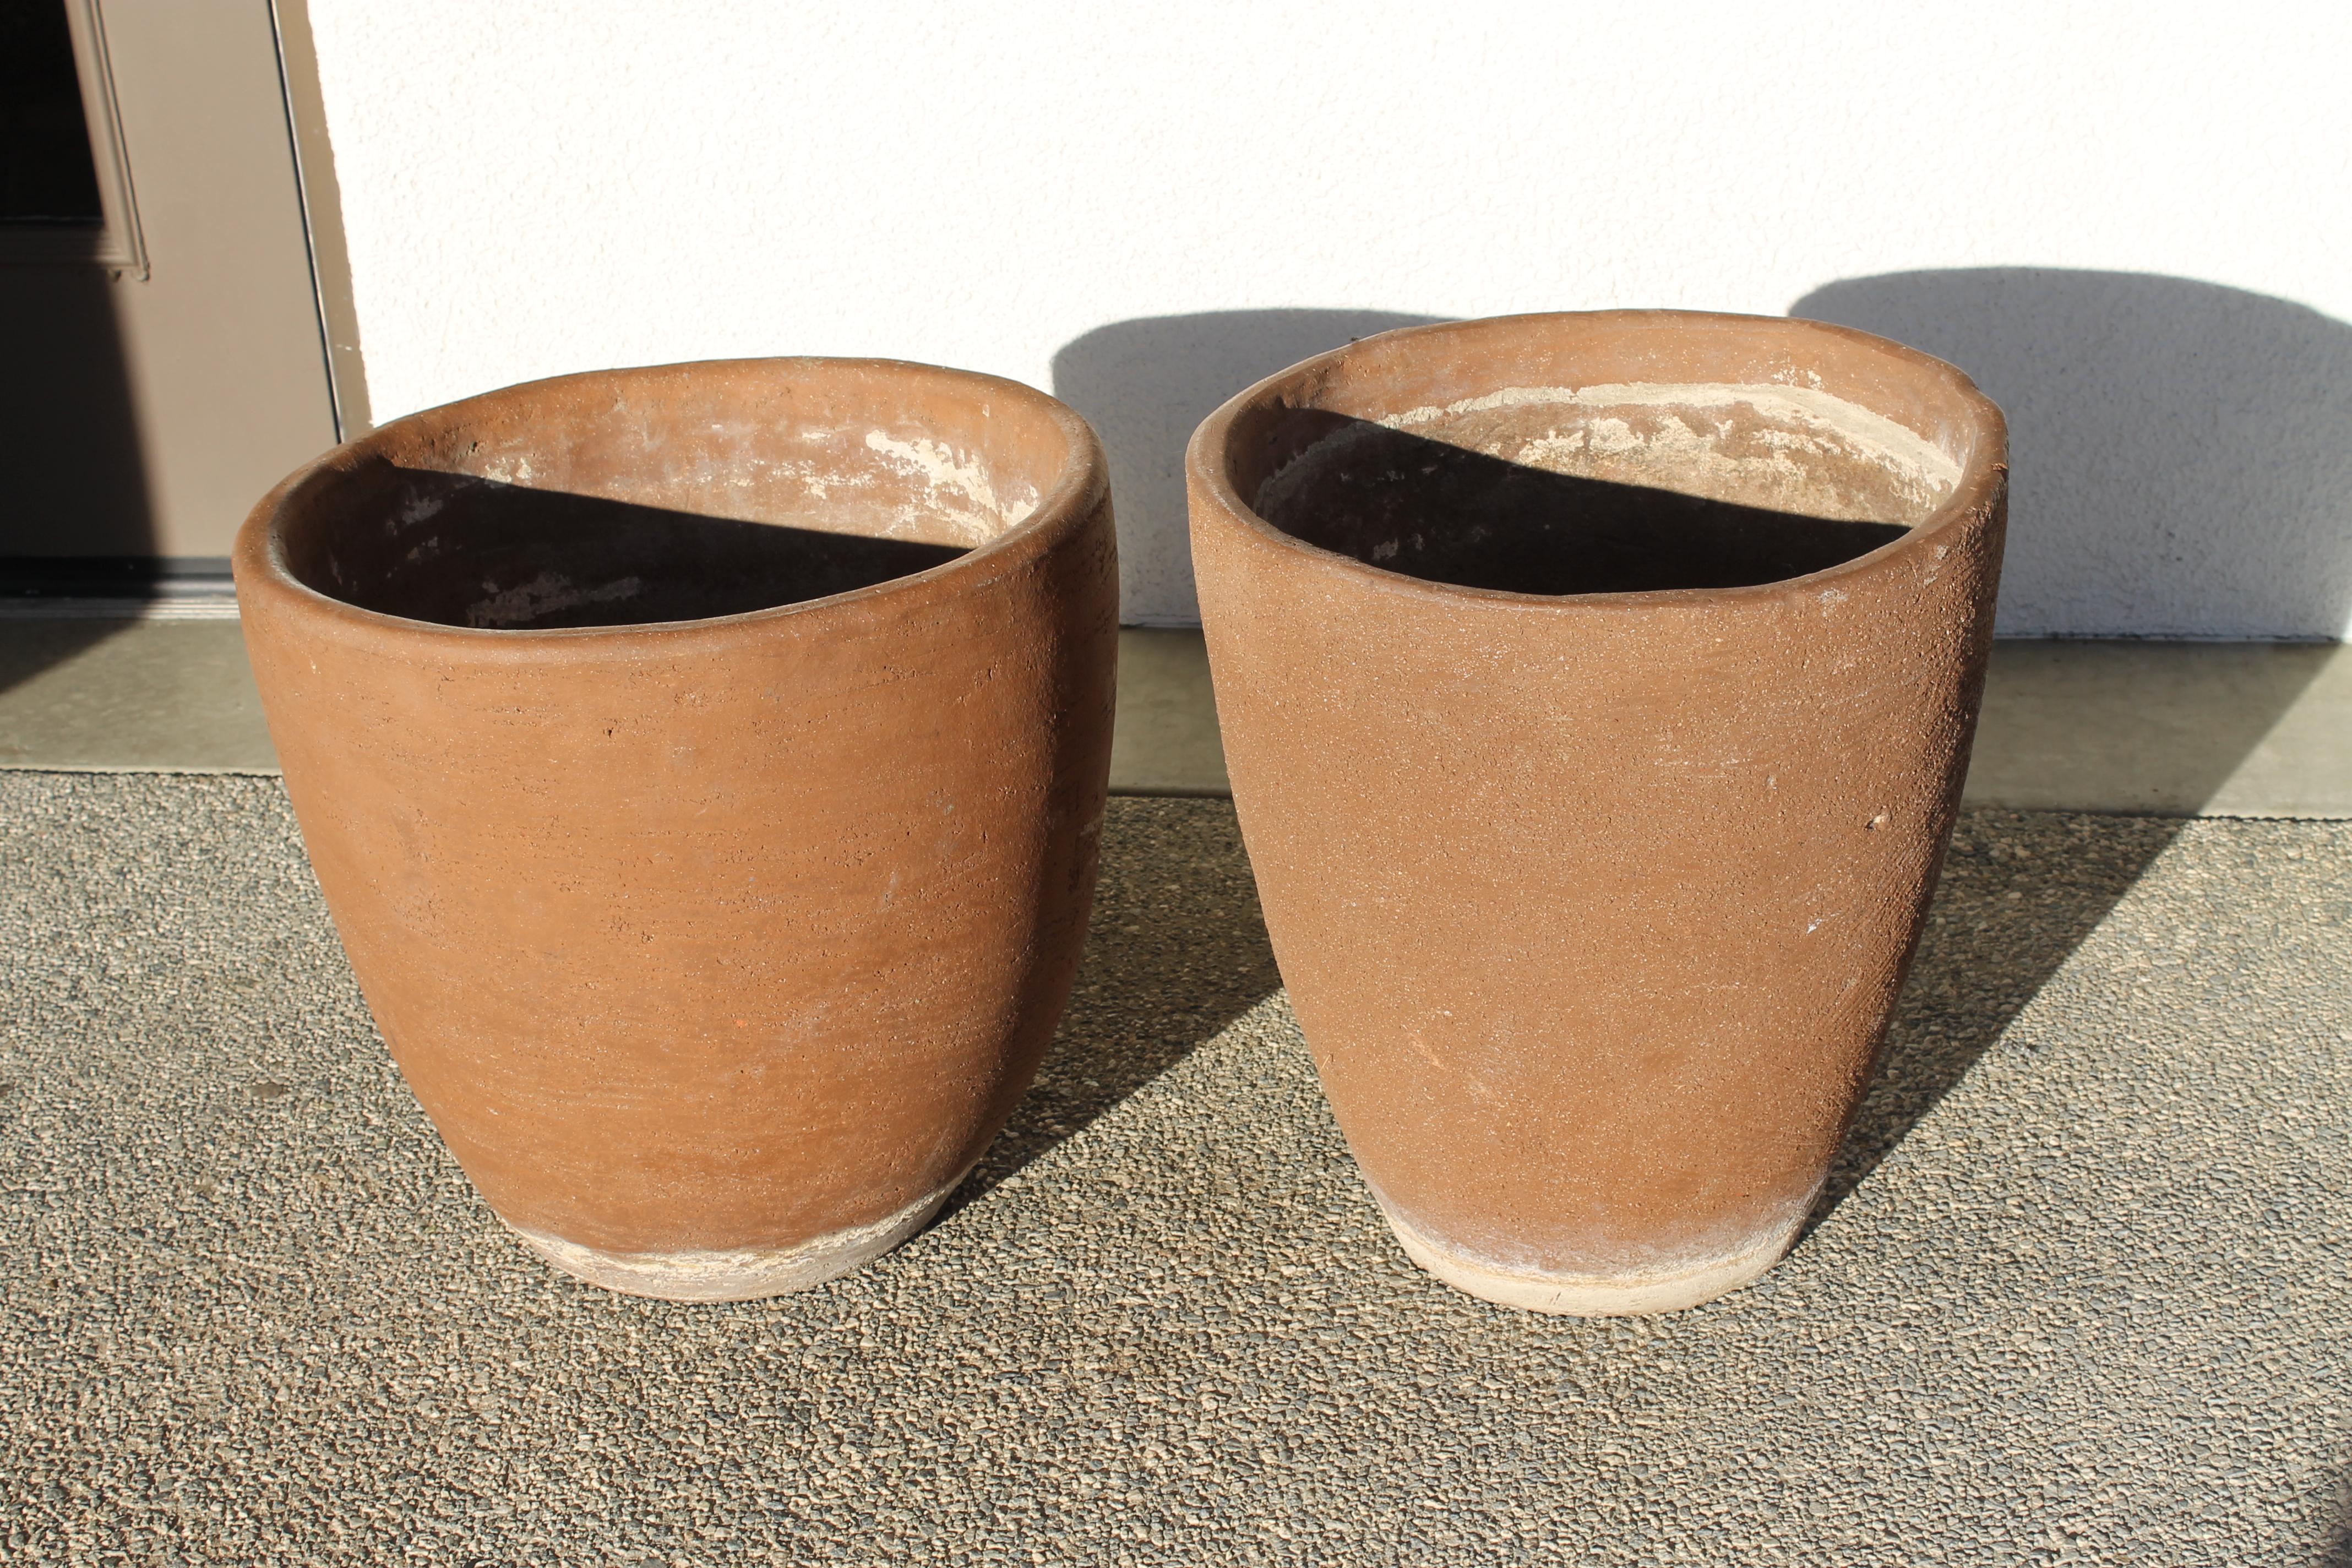 Pair of scrape stoneware planters by Stan Bitters for Hans Sumpf. Both are unglazed. Taller planter measures: 19